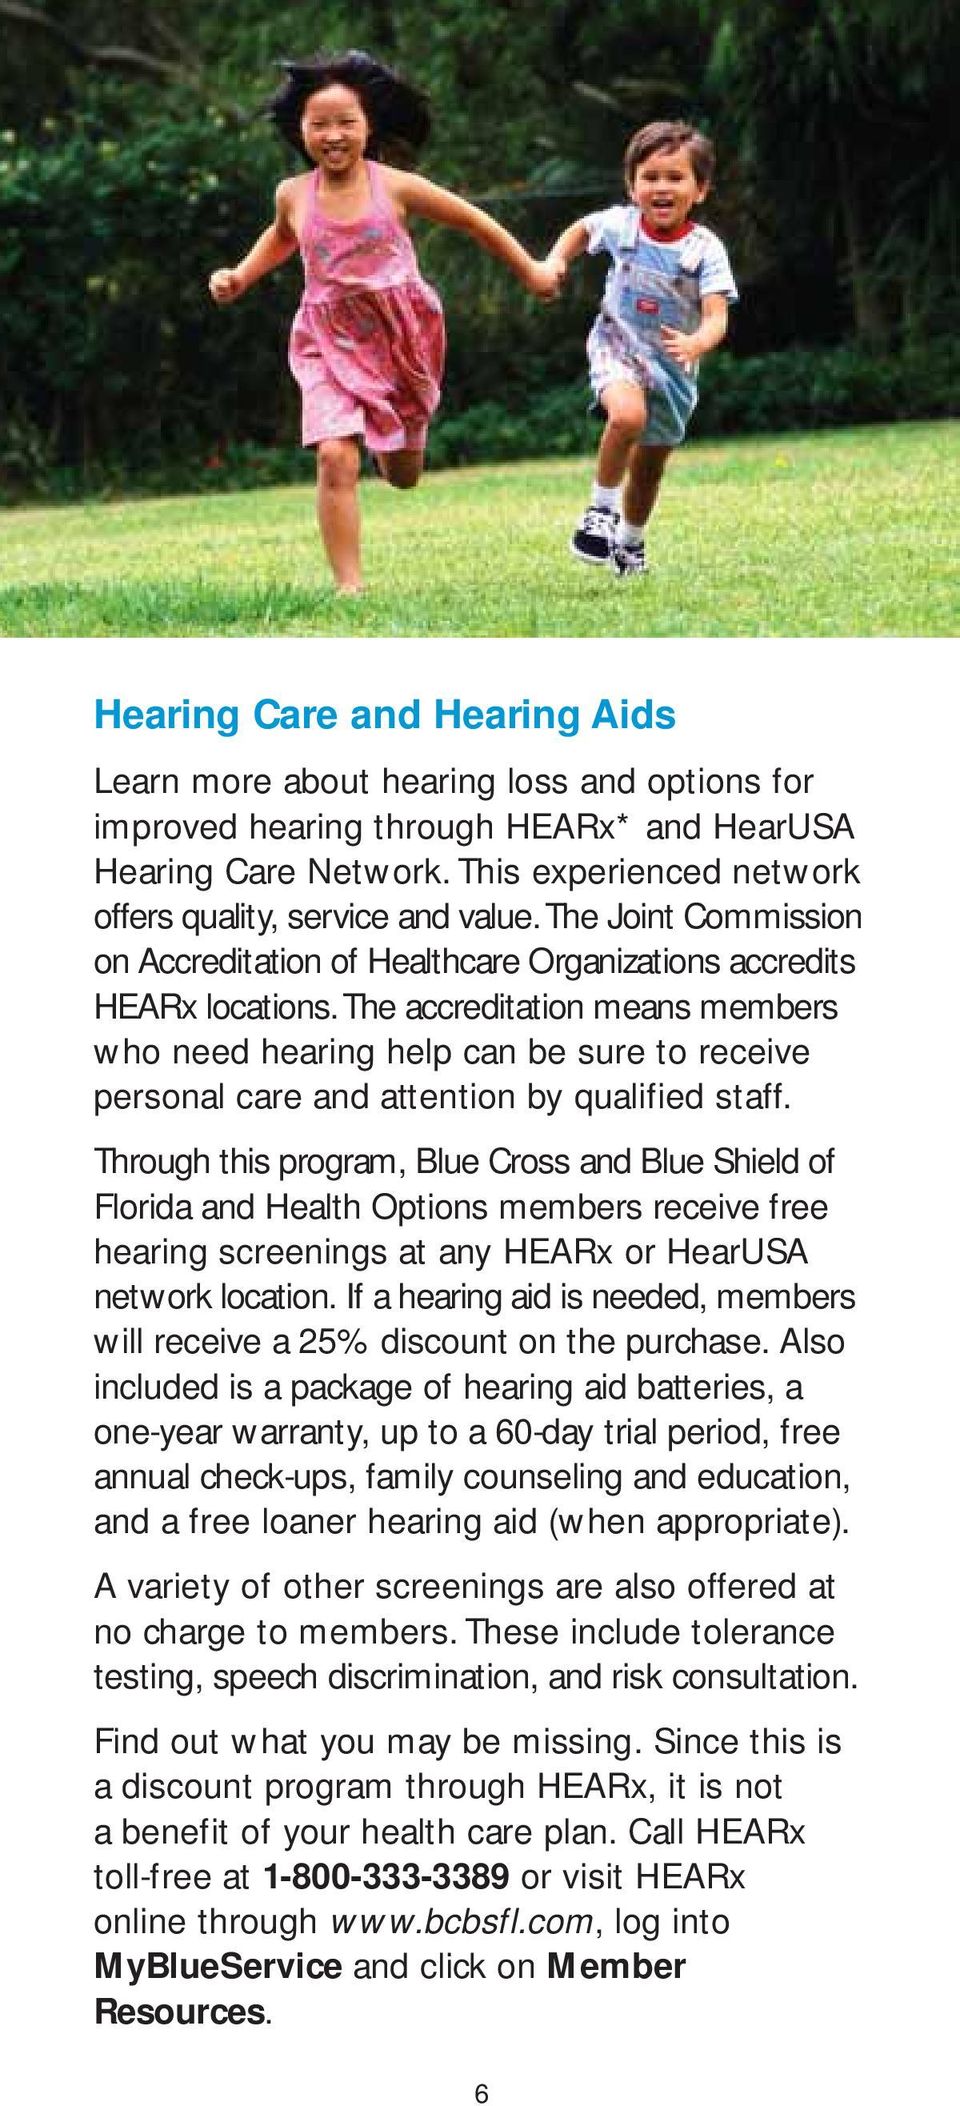 The accreditation means members who need hearing help can be sure to receive personal care and attention by qualified staff.